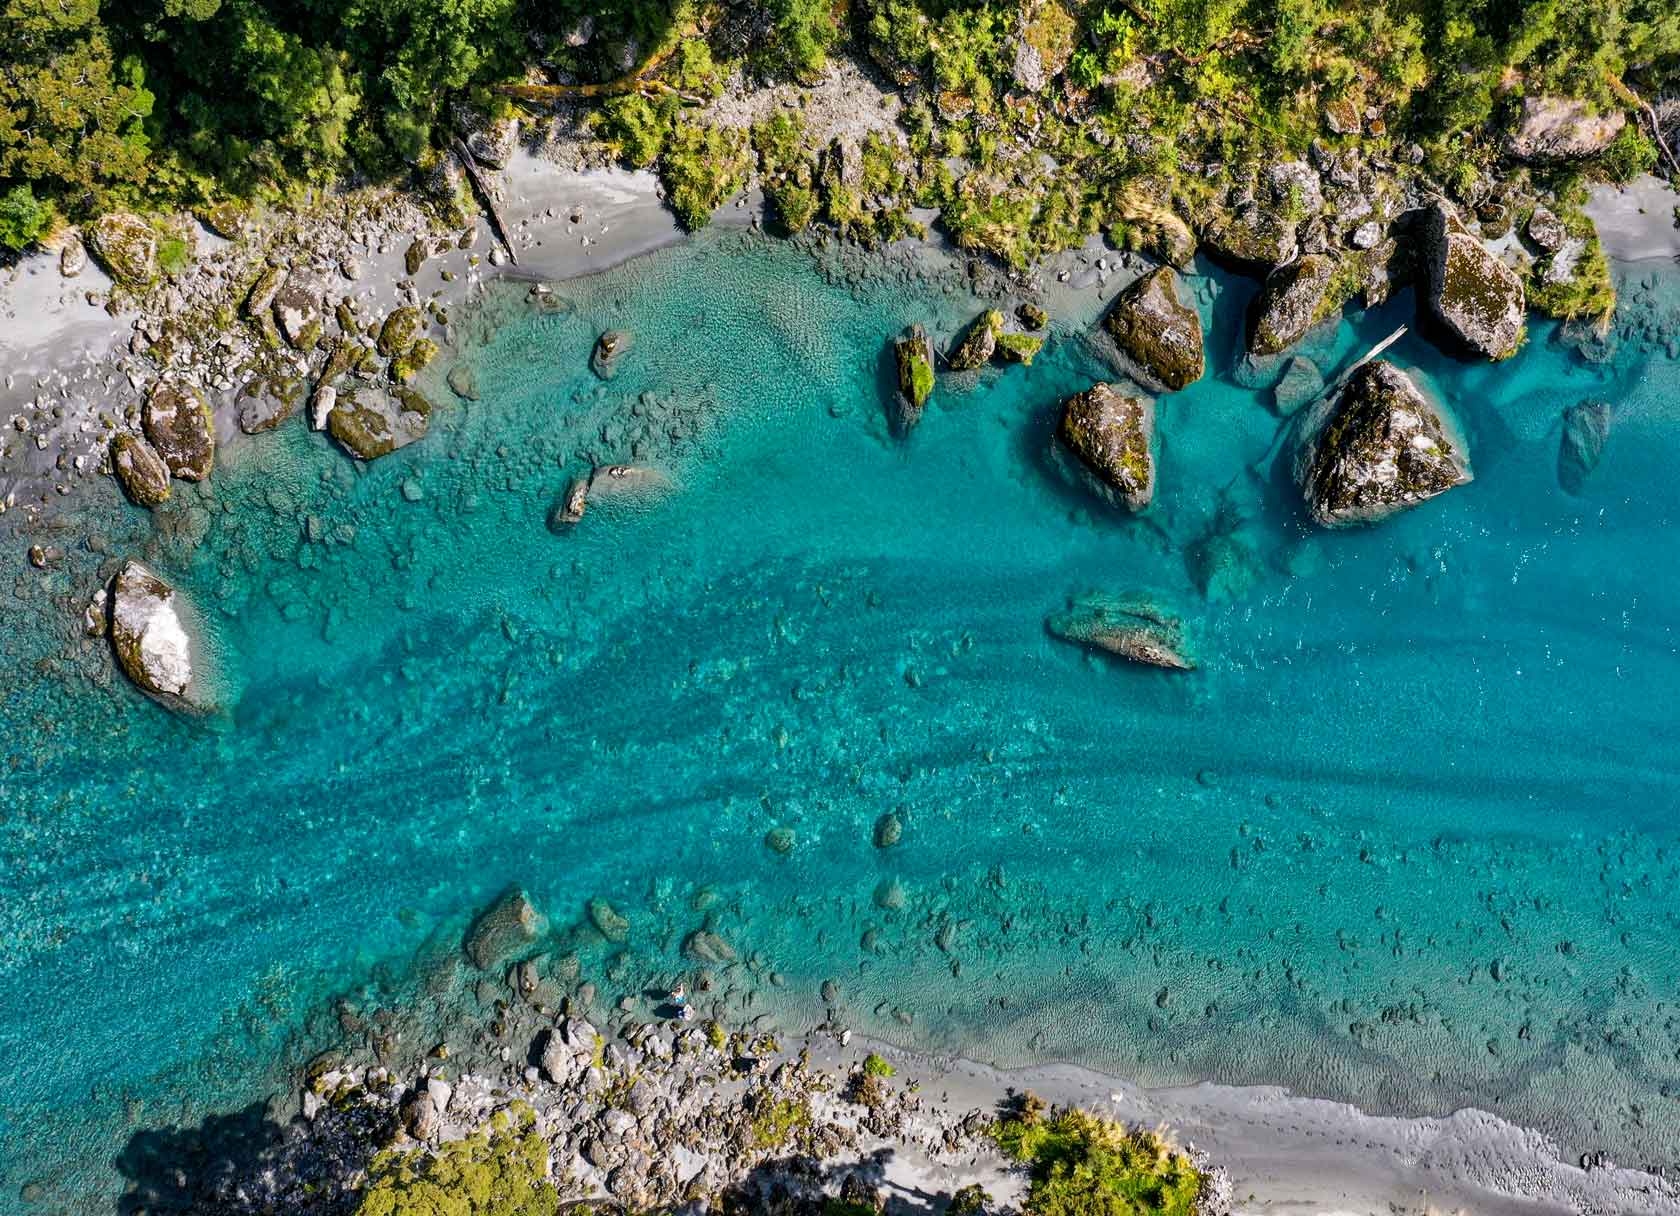 The Drift: A Q+A on Fly Fishing in New Zealand with Cedar Lodge’s Manager